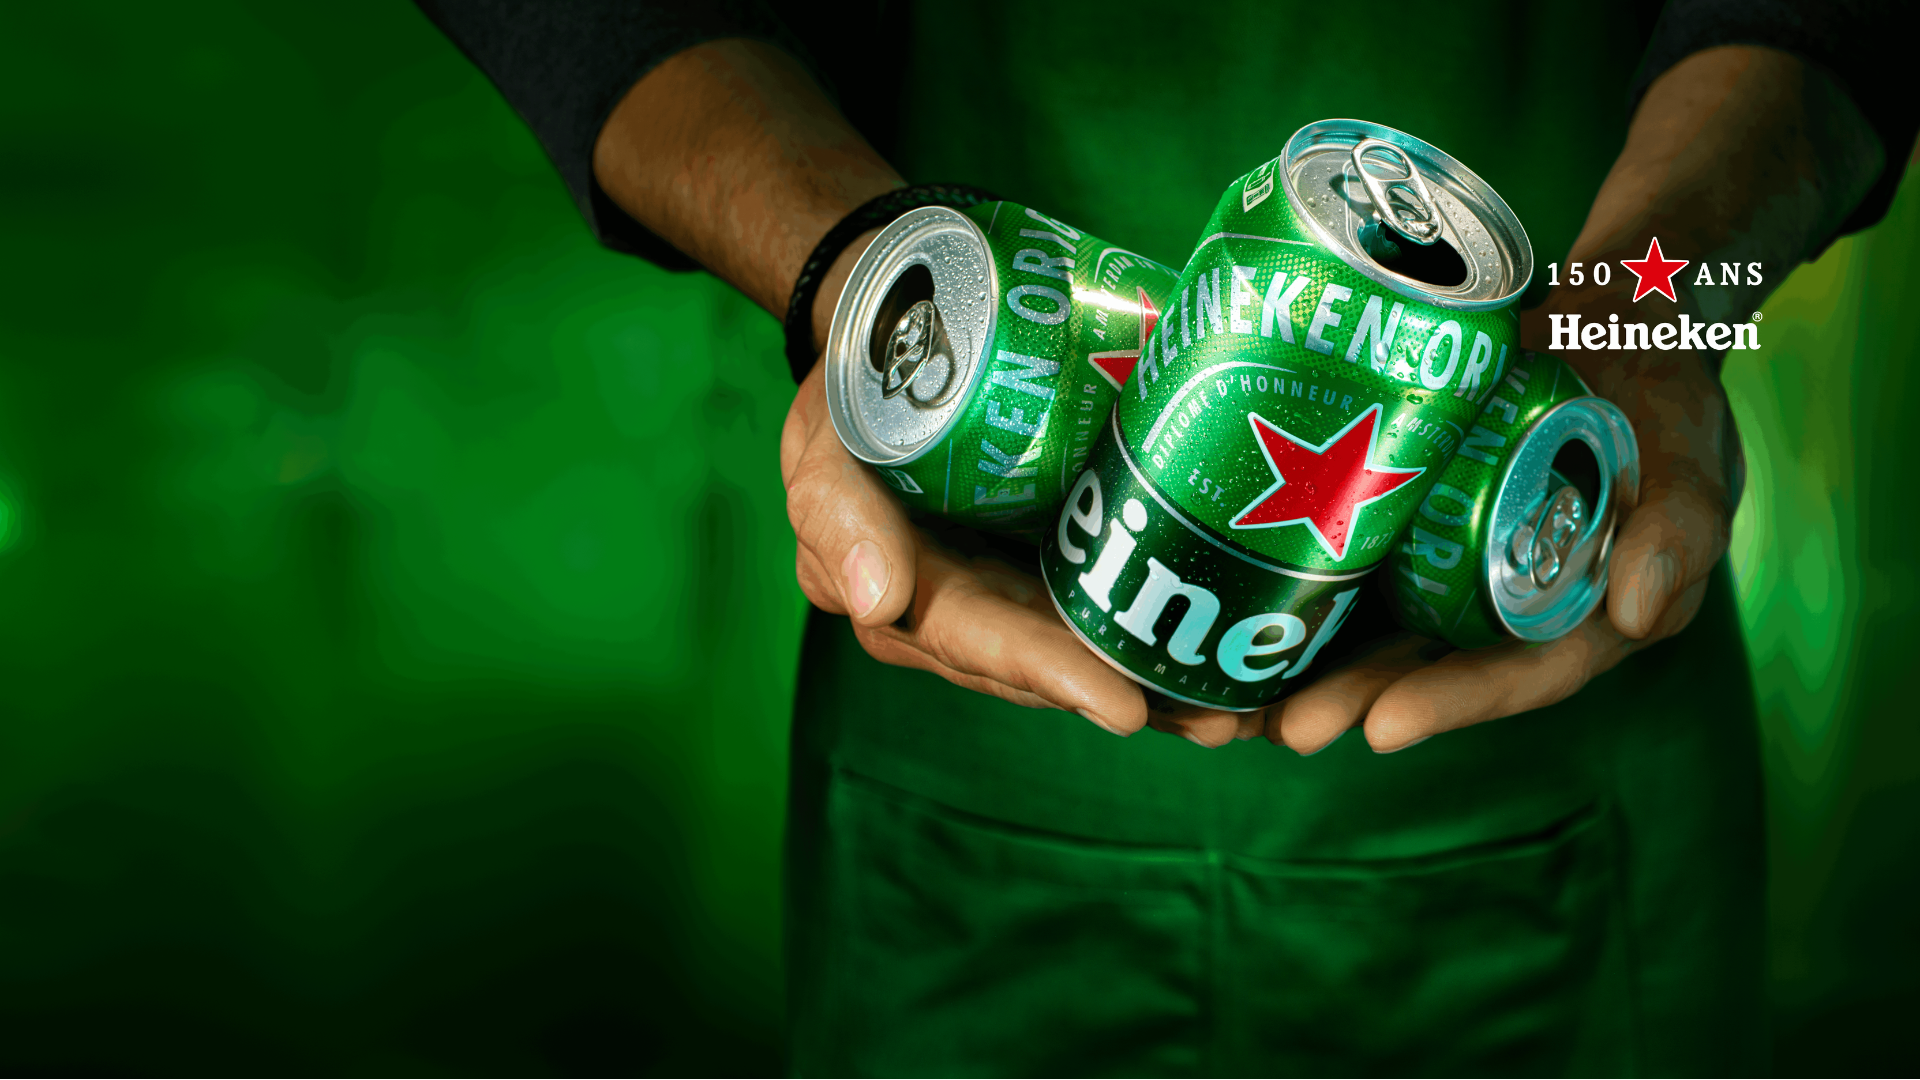 Heineken Campagne 150 Ans Canette Recyclable